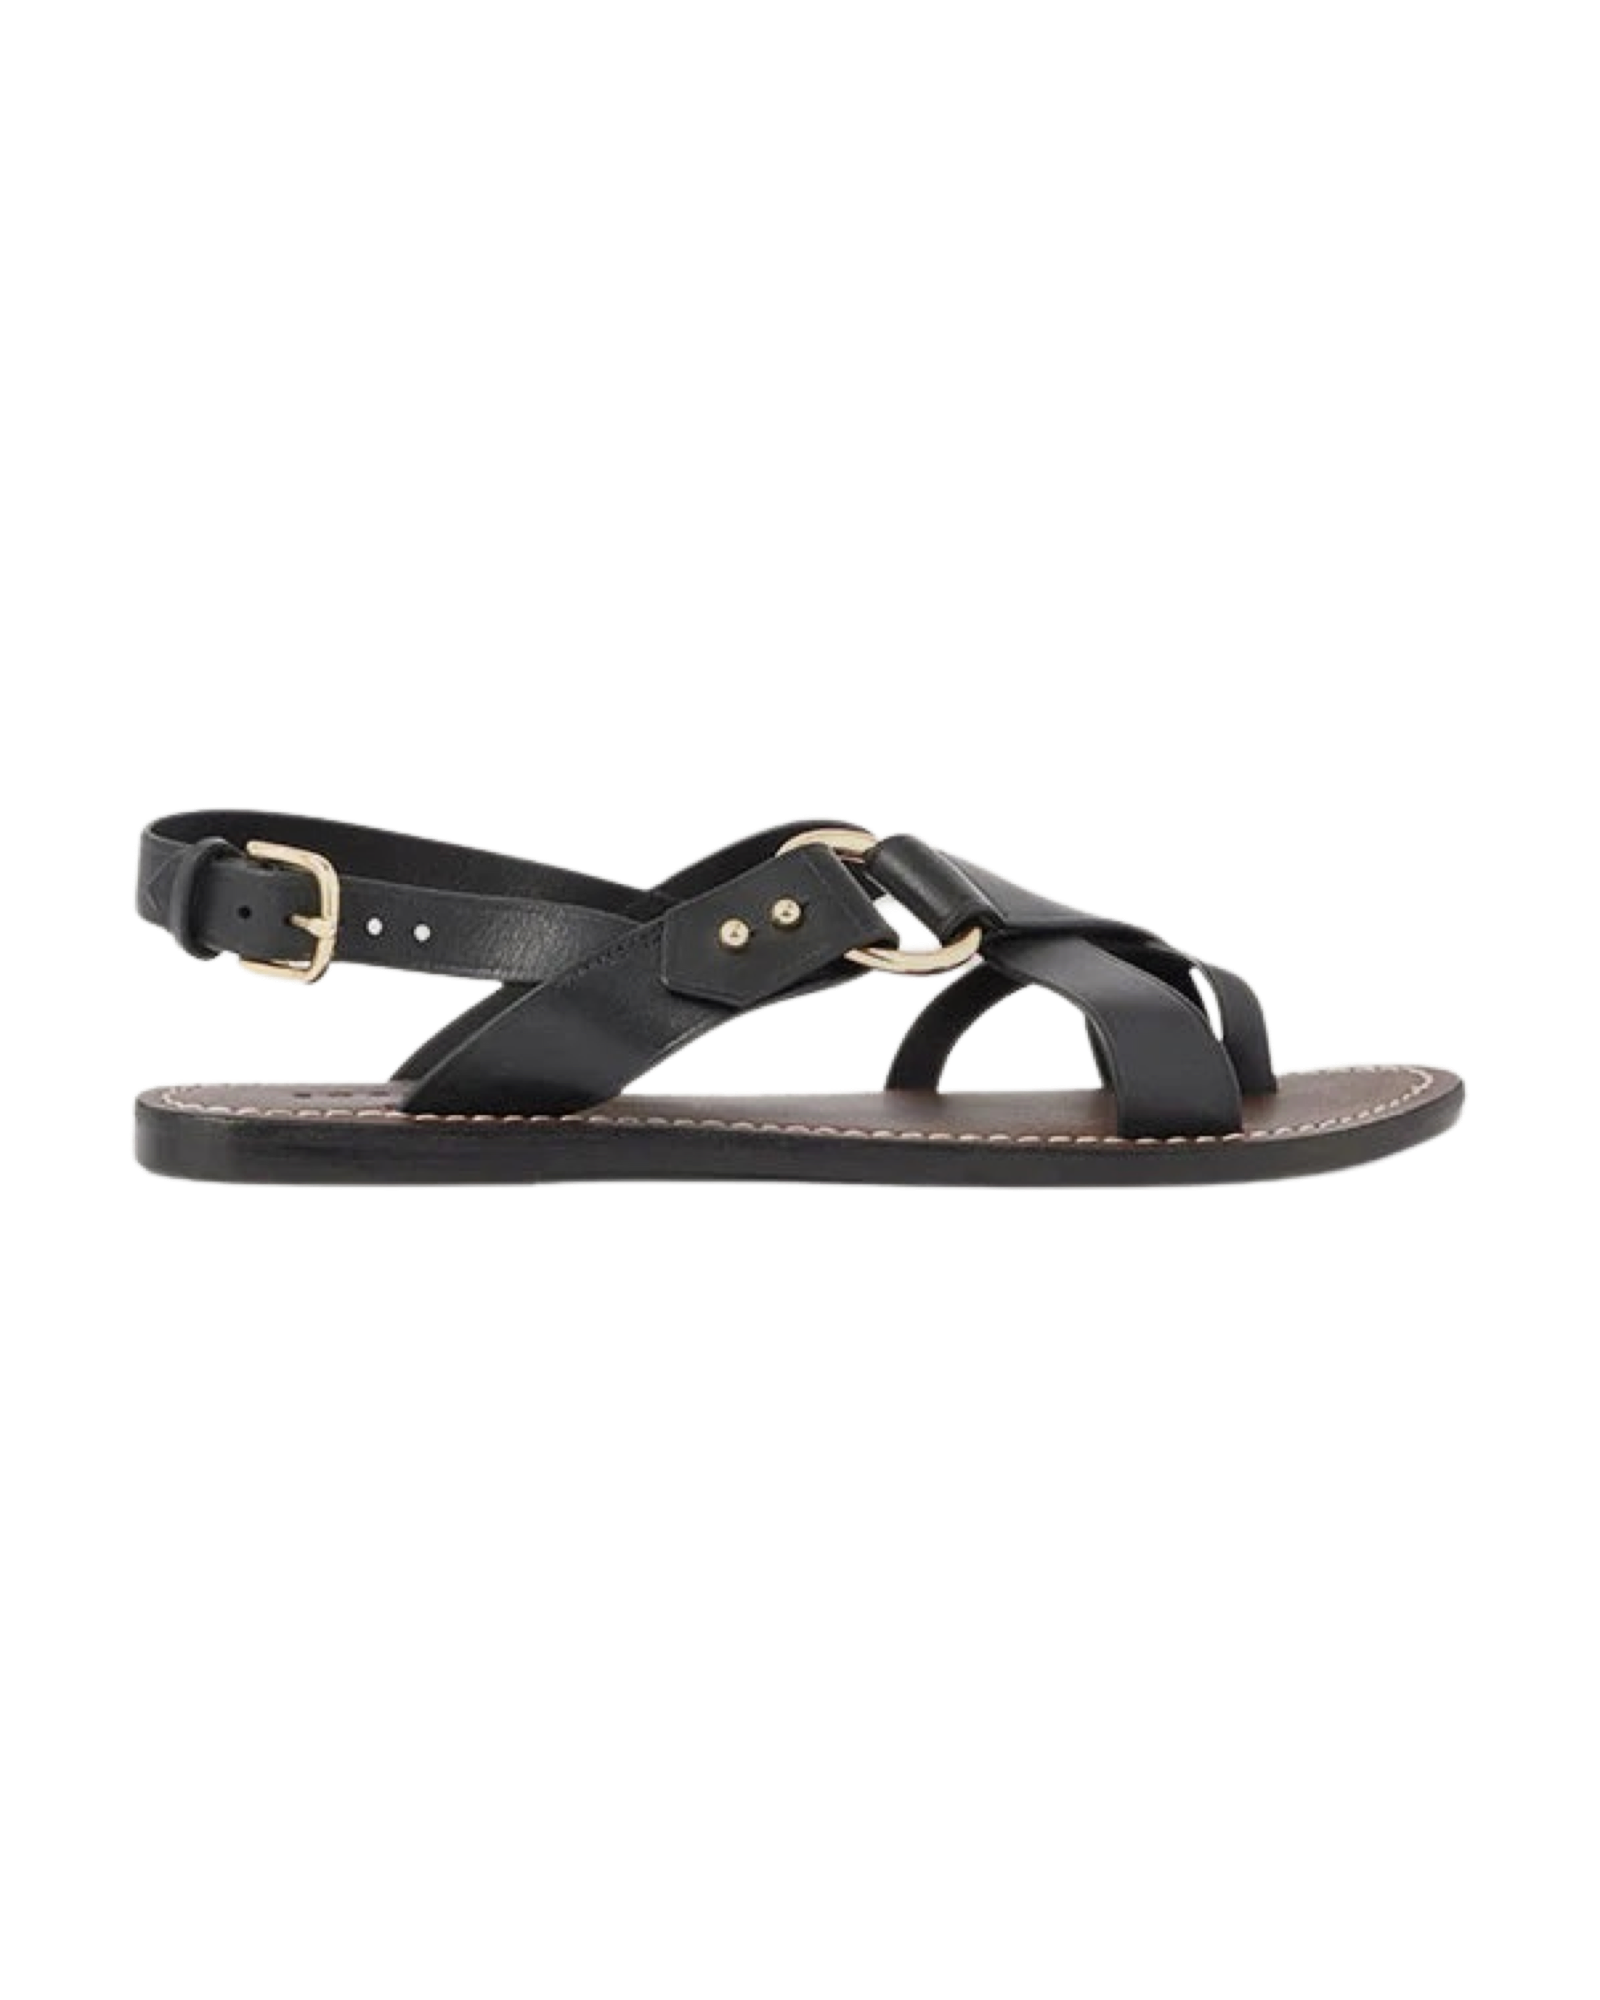 Florence Sandals